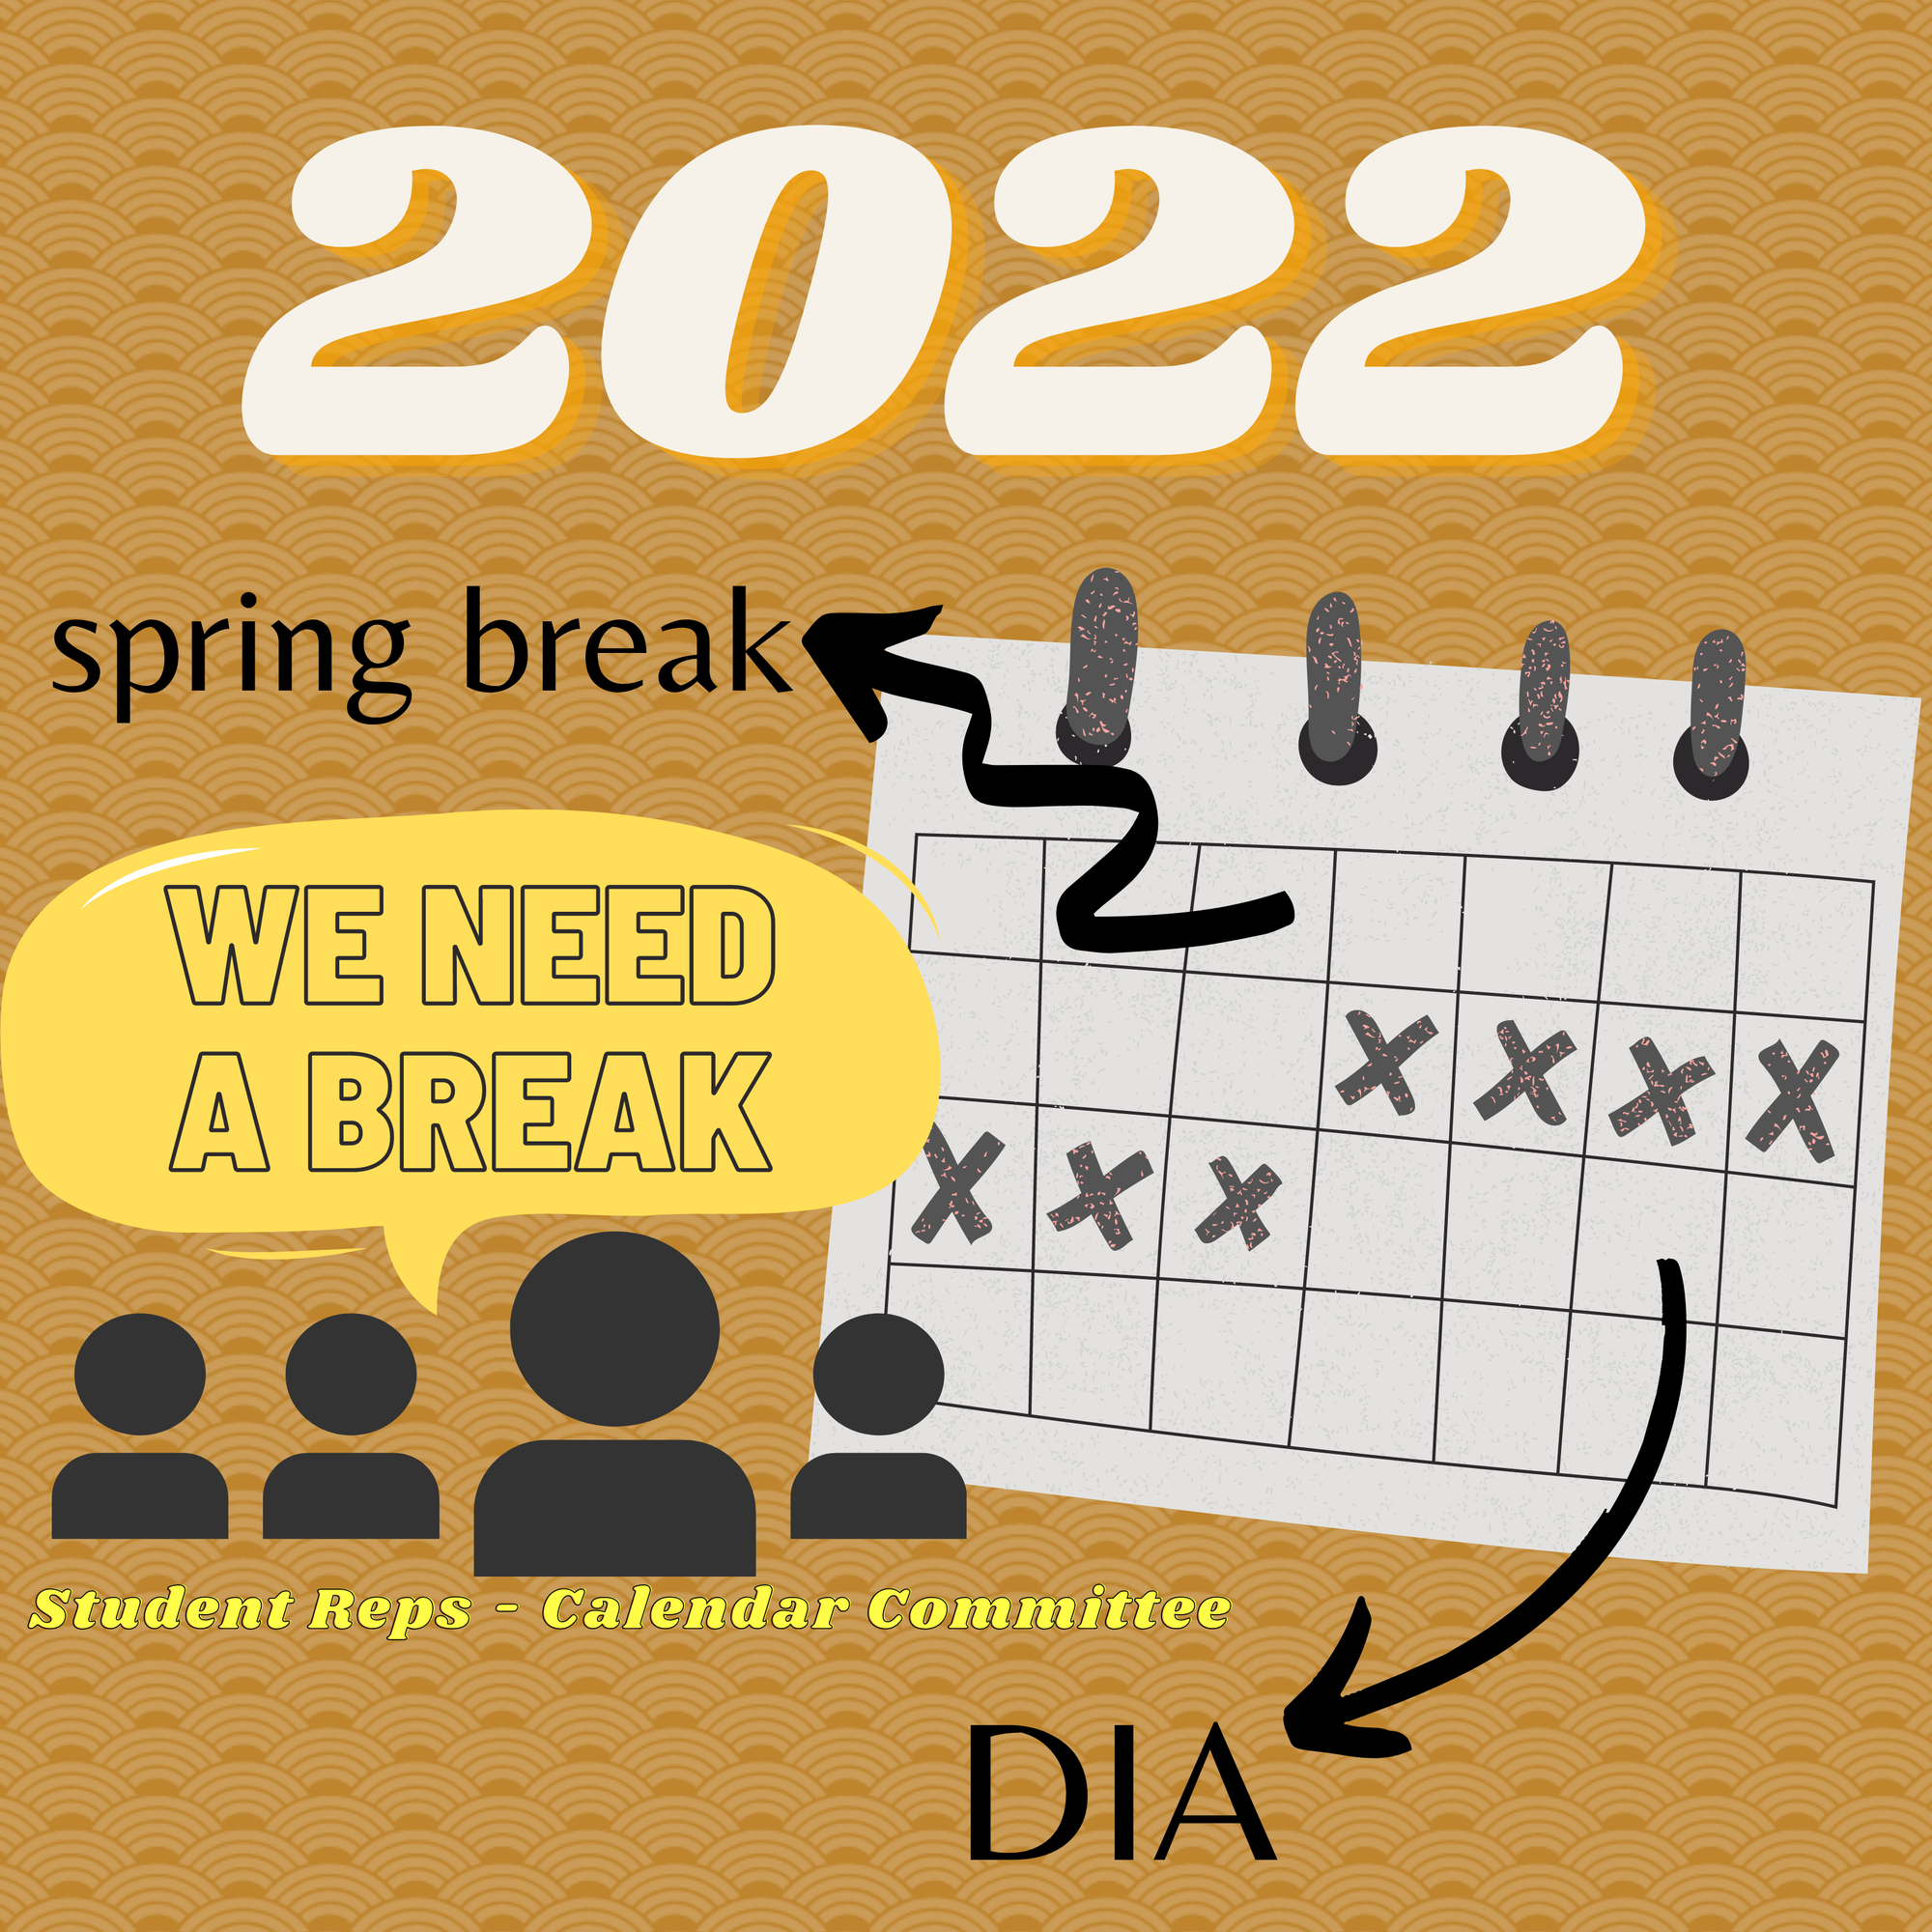 Calendar Committee Details New Updates To Spring 2022 With Week Long Spring Break Returning The Baylor Lariat